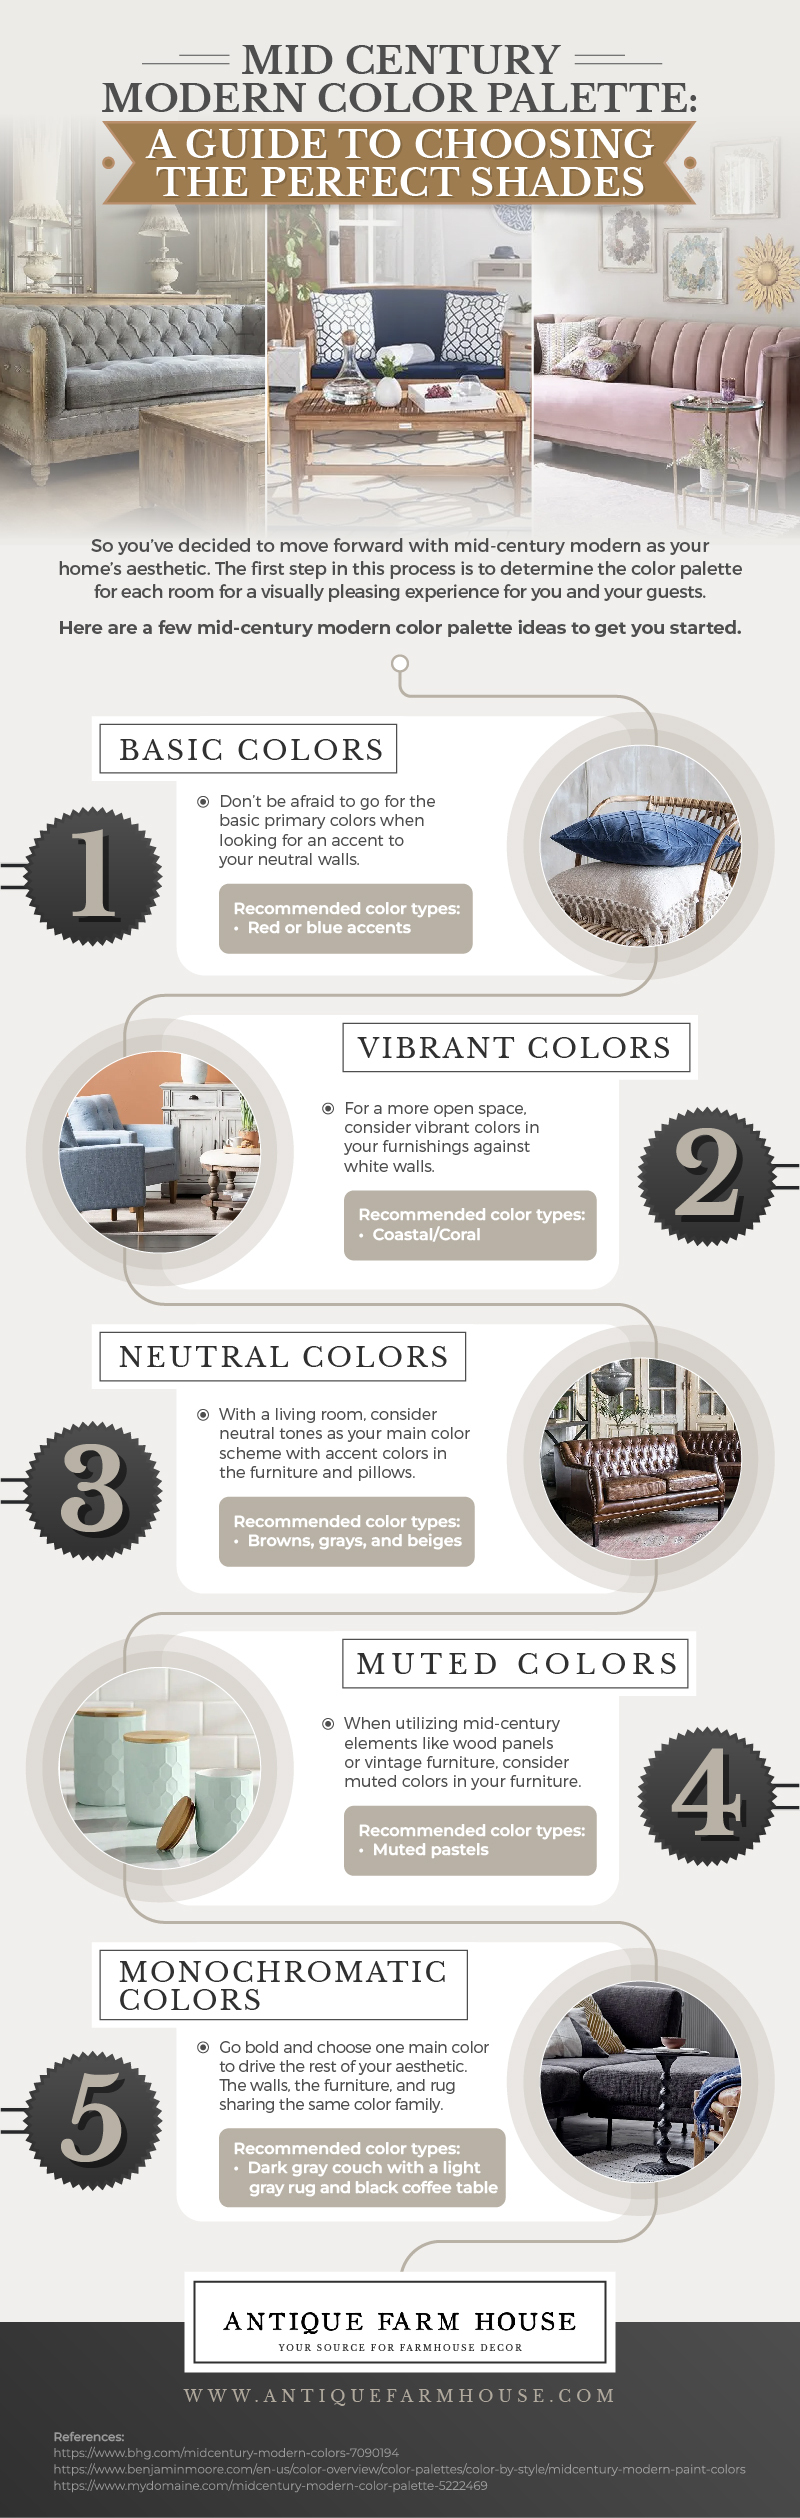 Mid-Century Modern Color Palette: A Guide to Choosing the Perfect Shades